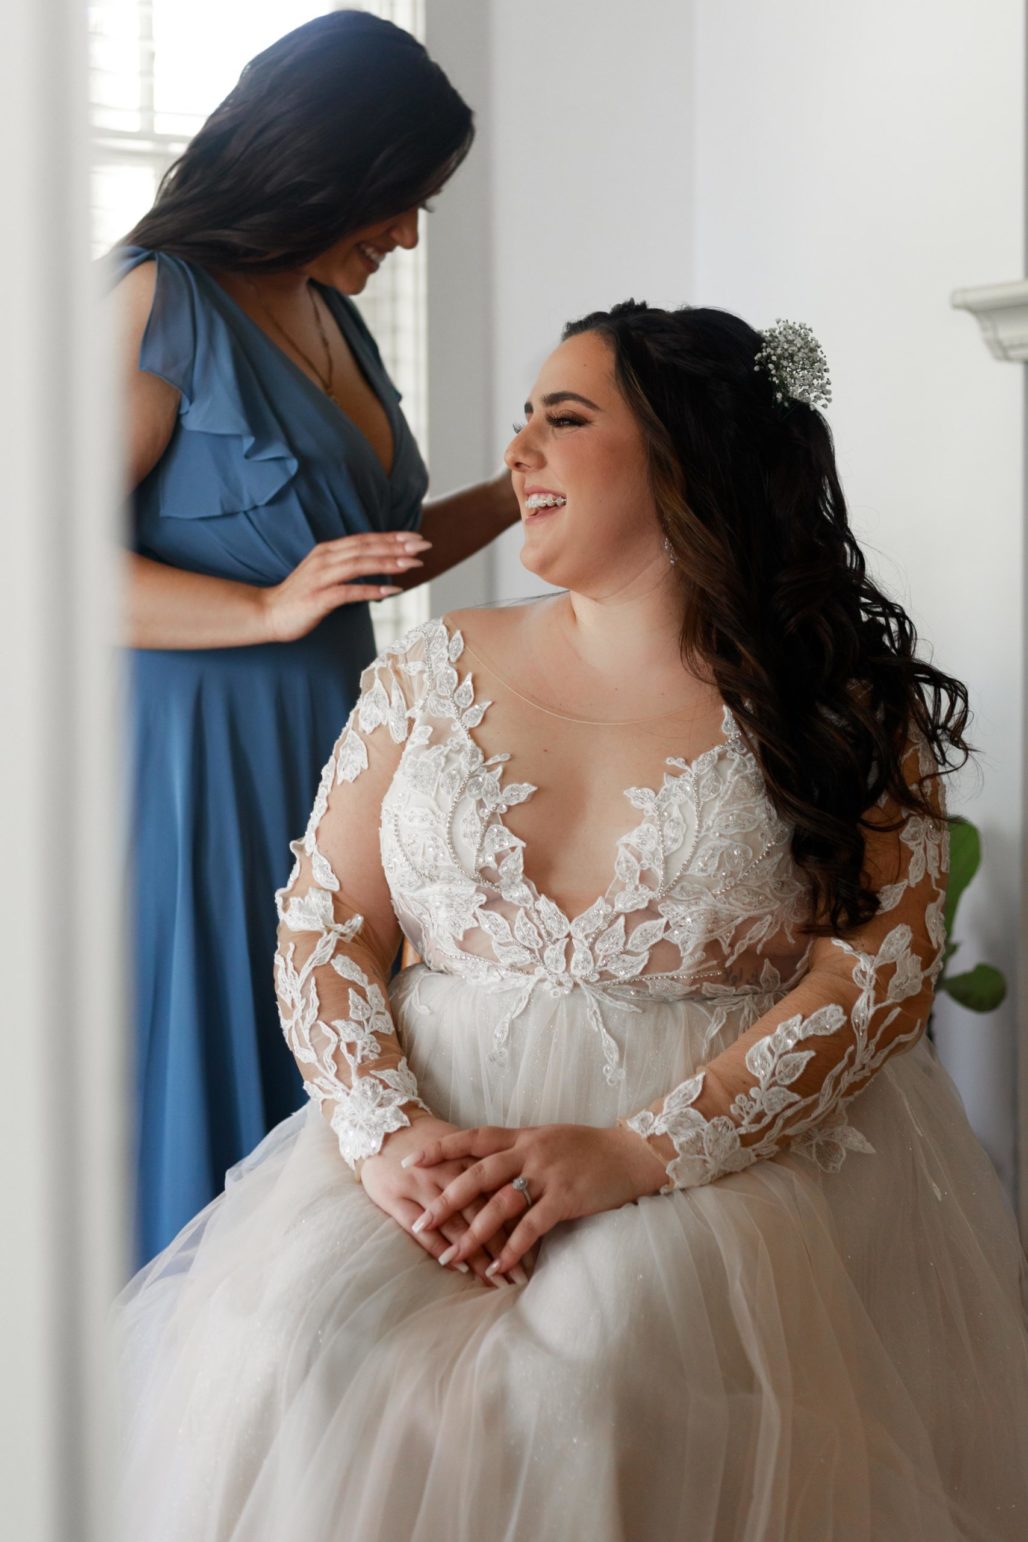 Bride to be is getting ready with her bridesmaid sitting joyfully near a window.